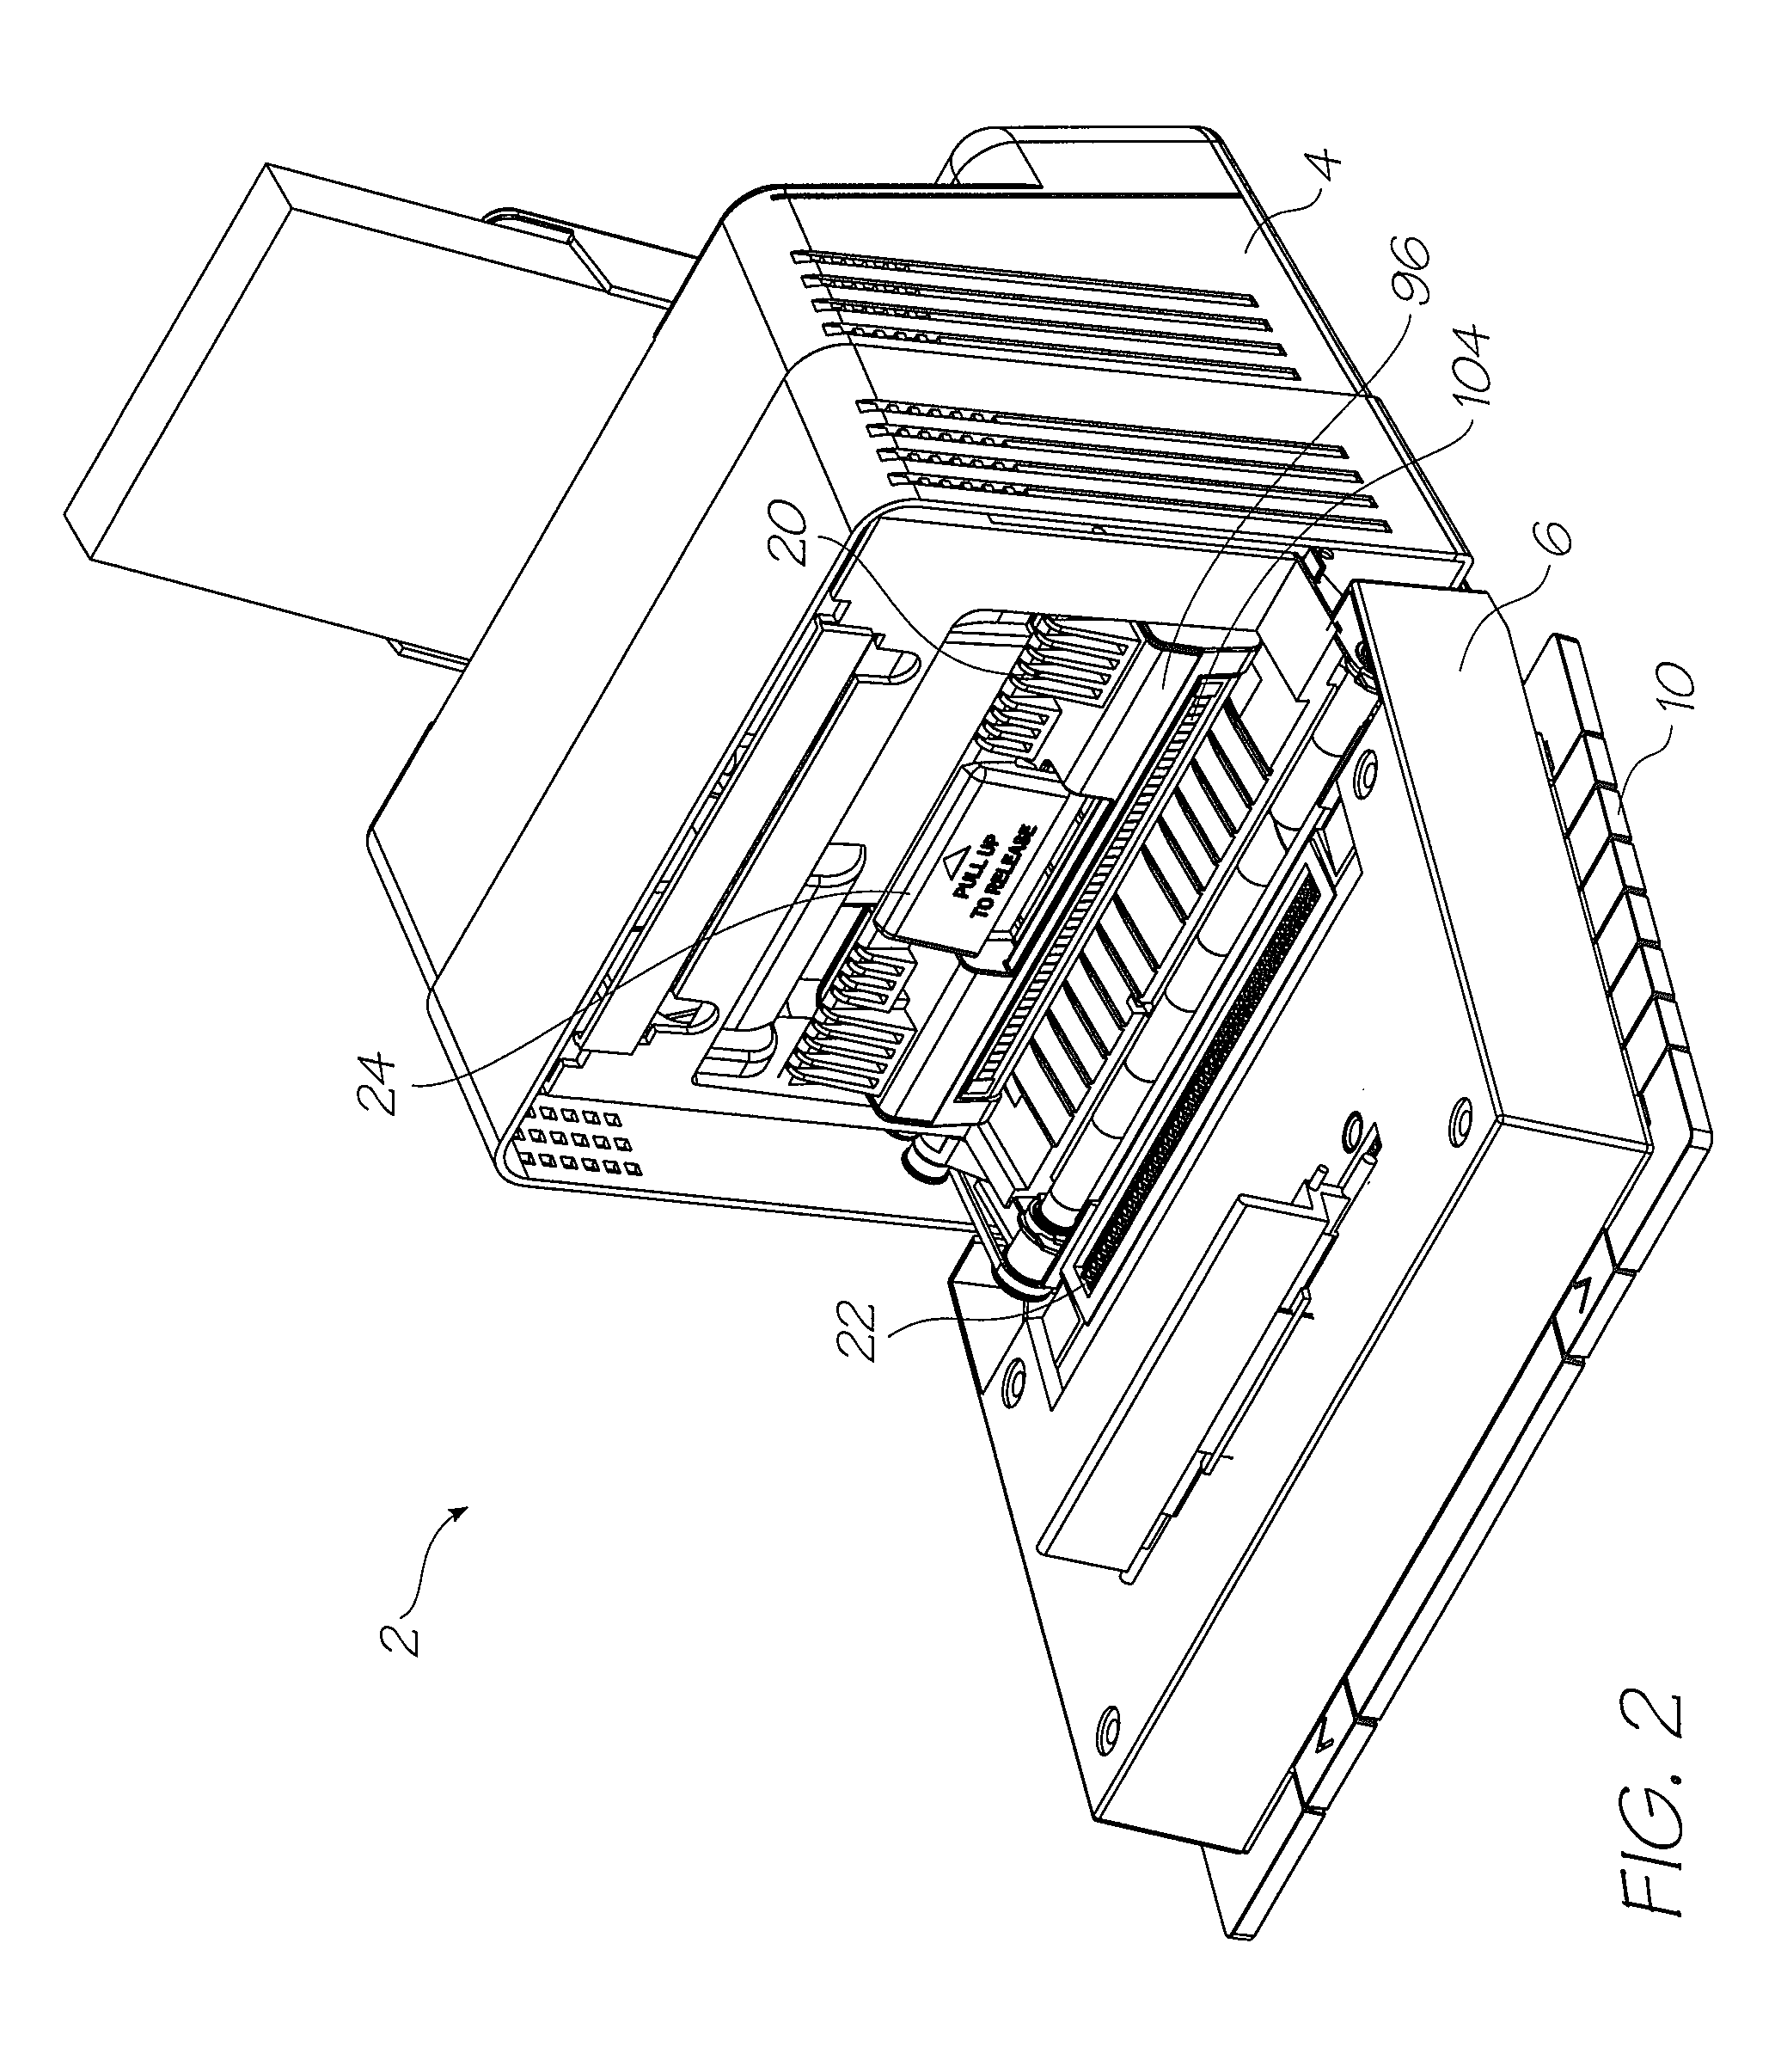 Printhead with non-priming cavities for pulse damping